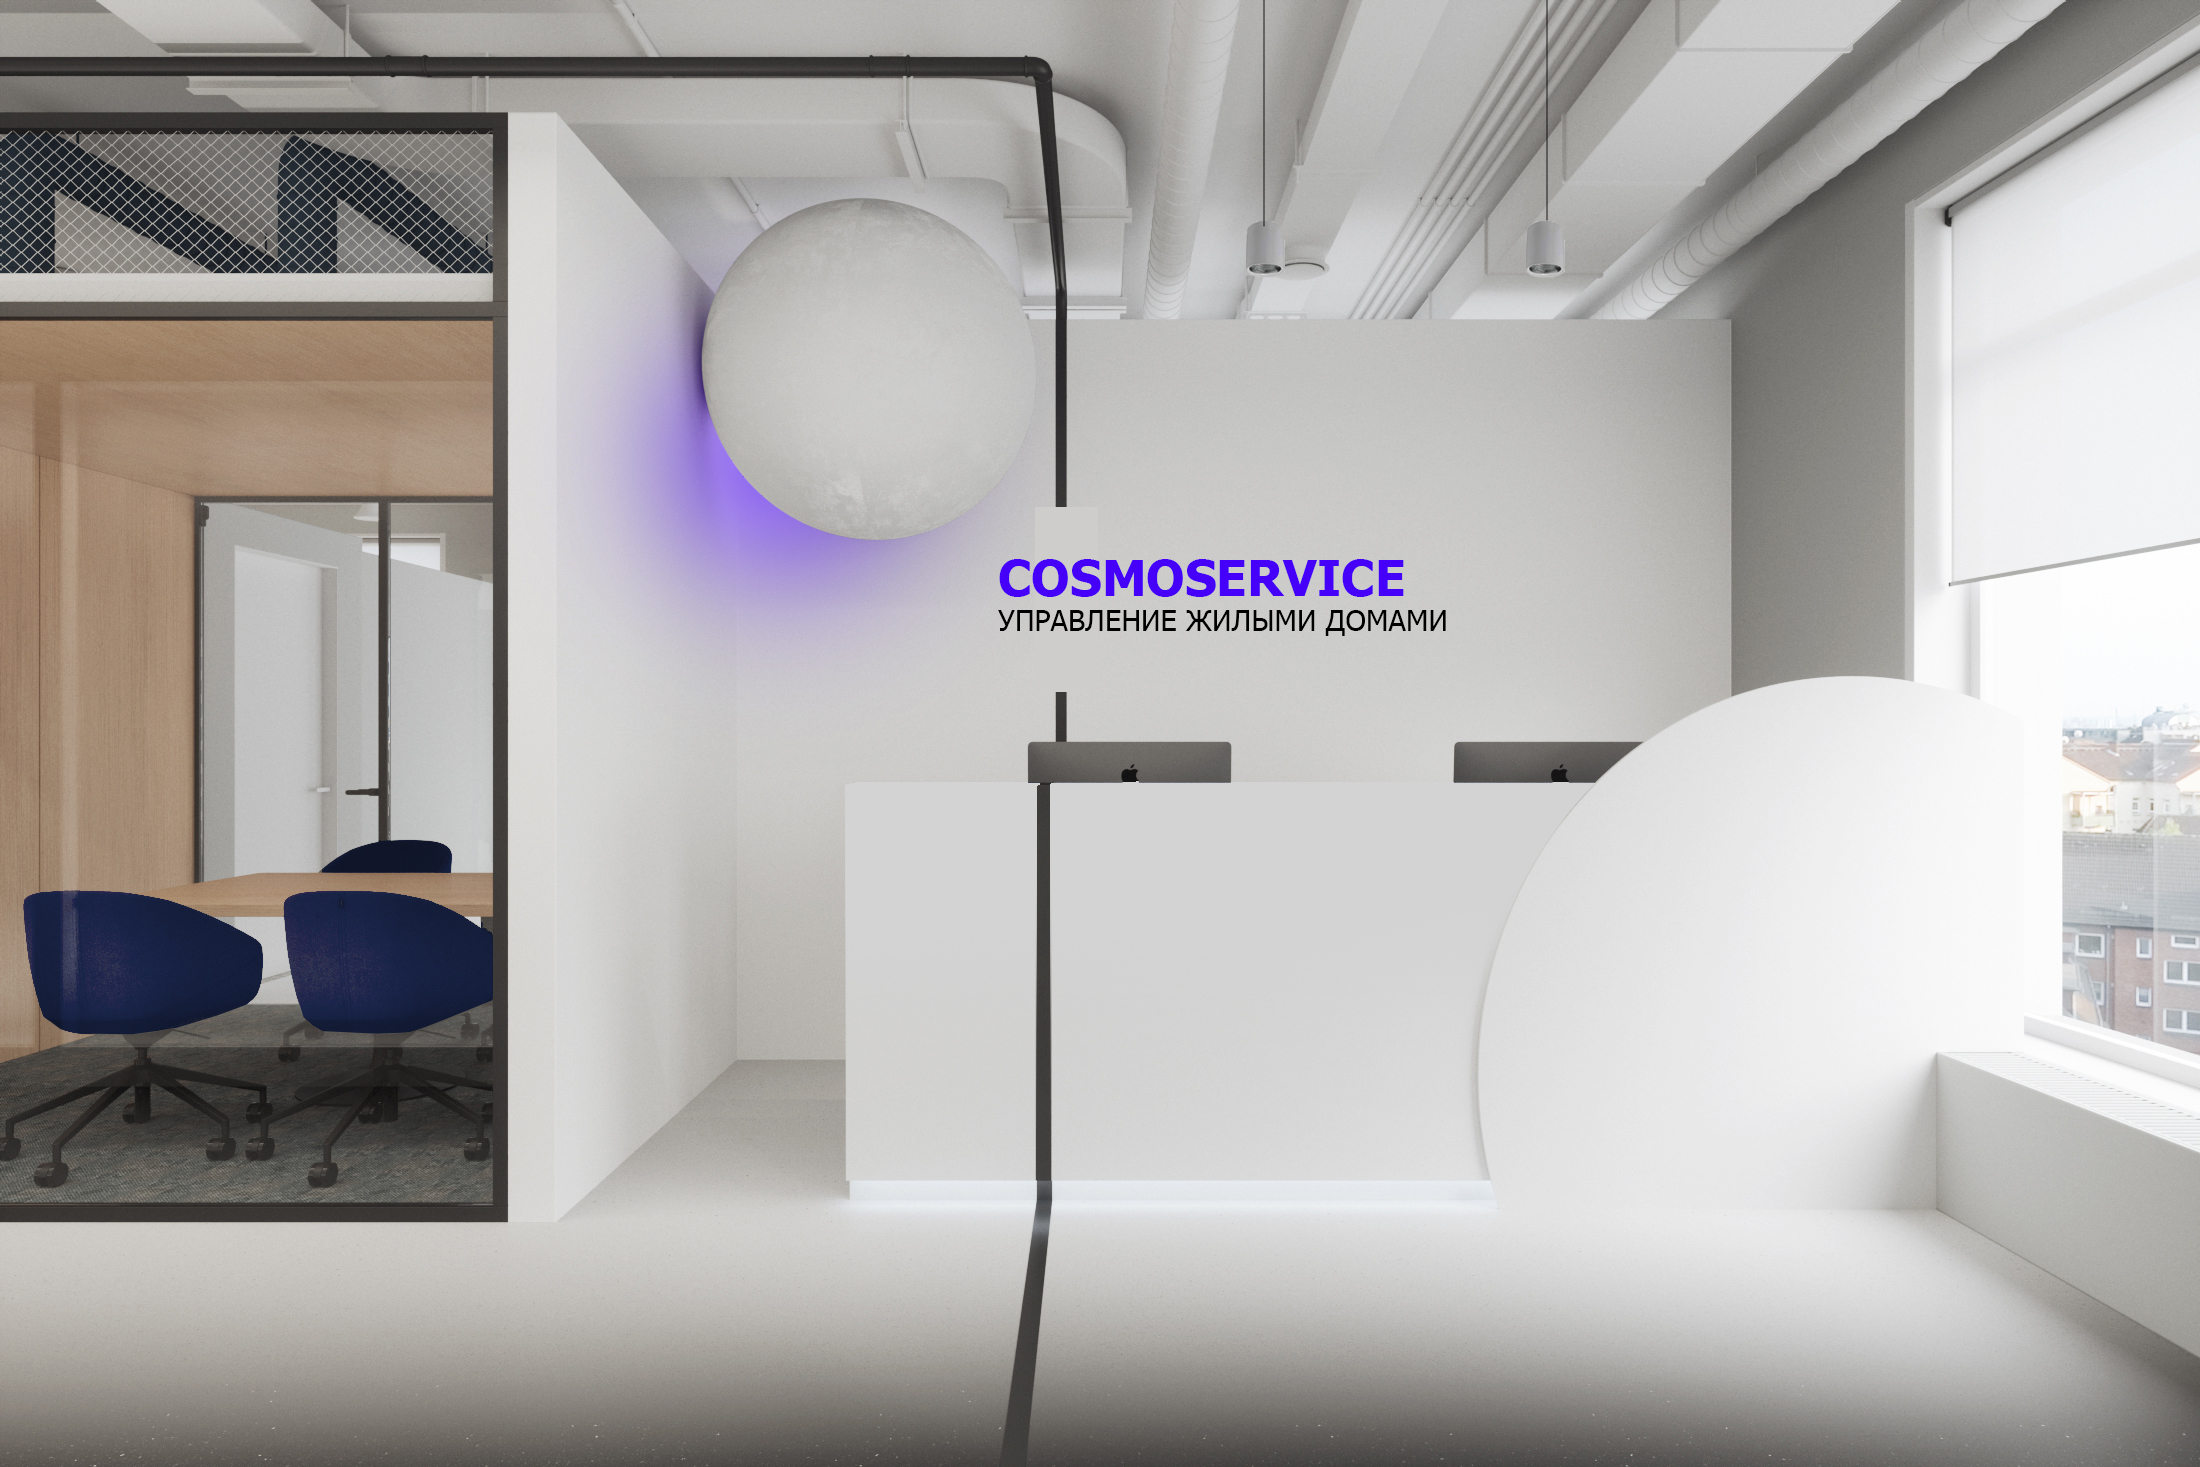 Minimalist office design for Cosmoservice residential estate management company 